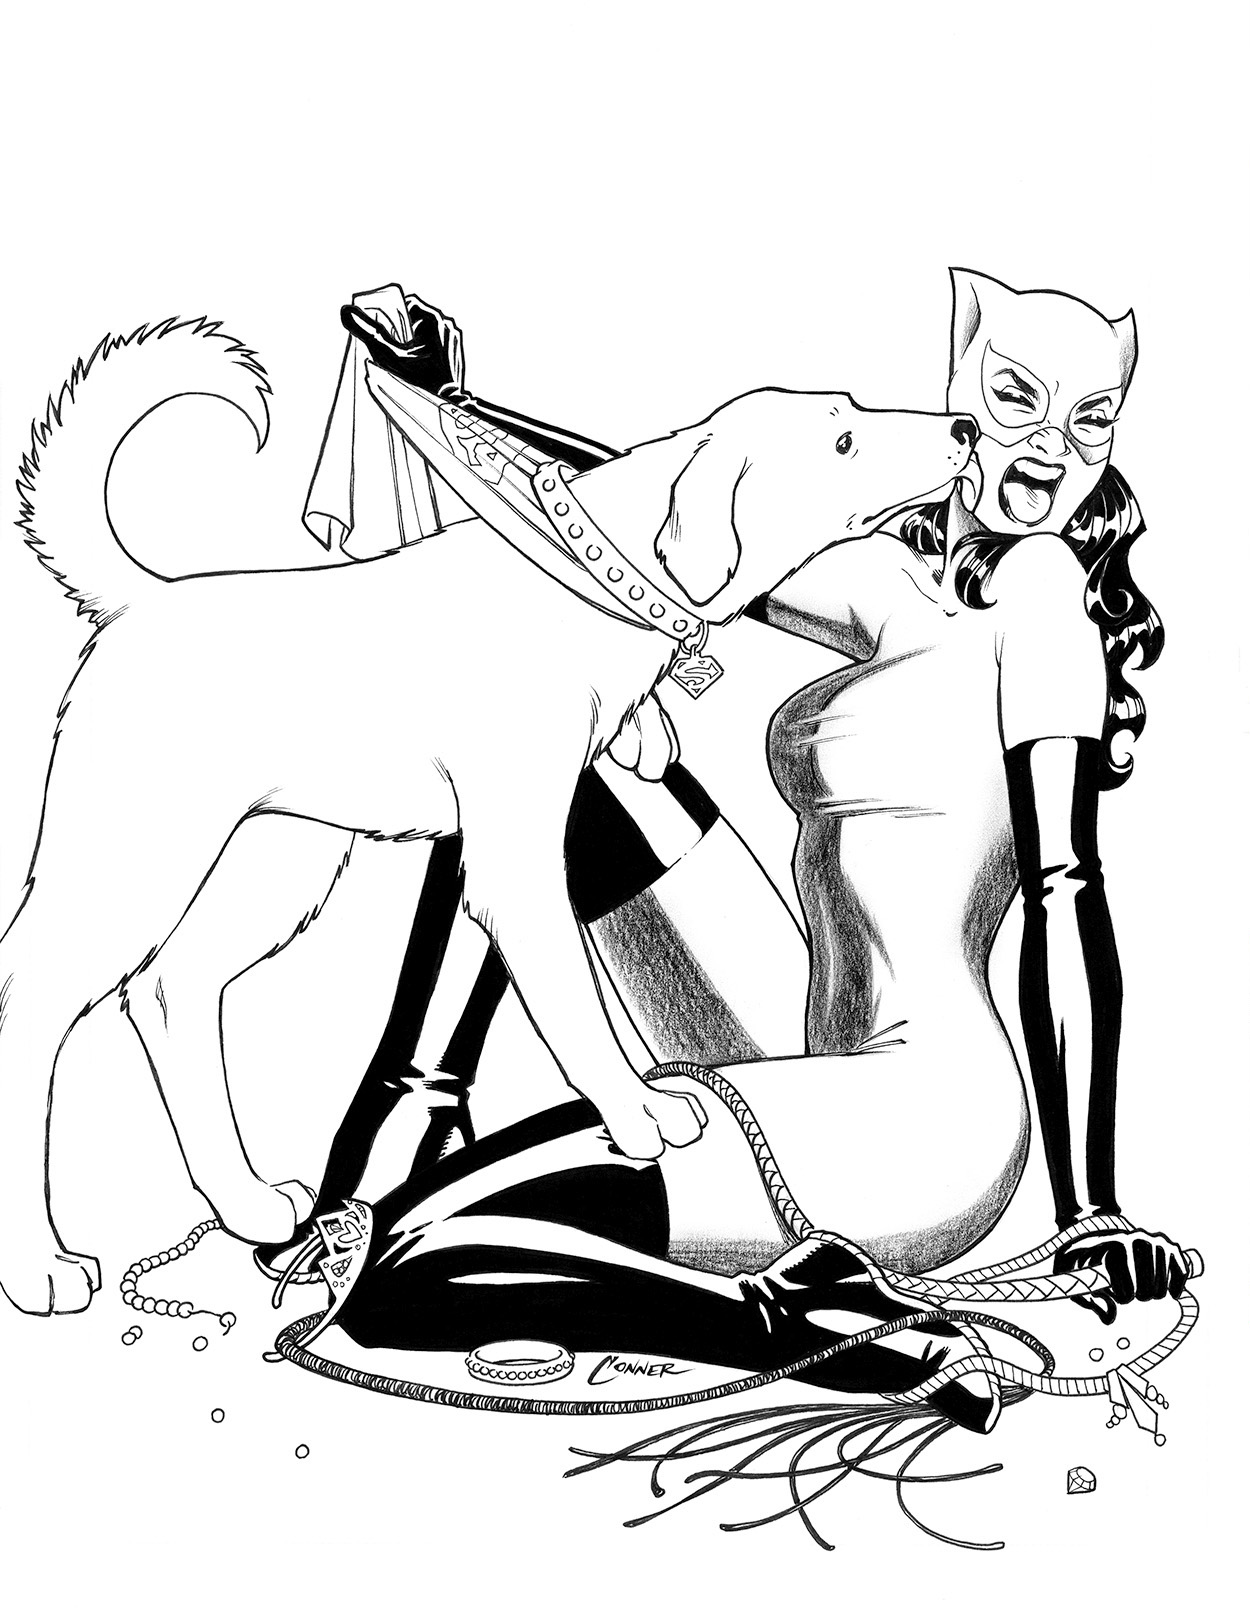 Catwomanbefore.jpg